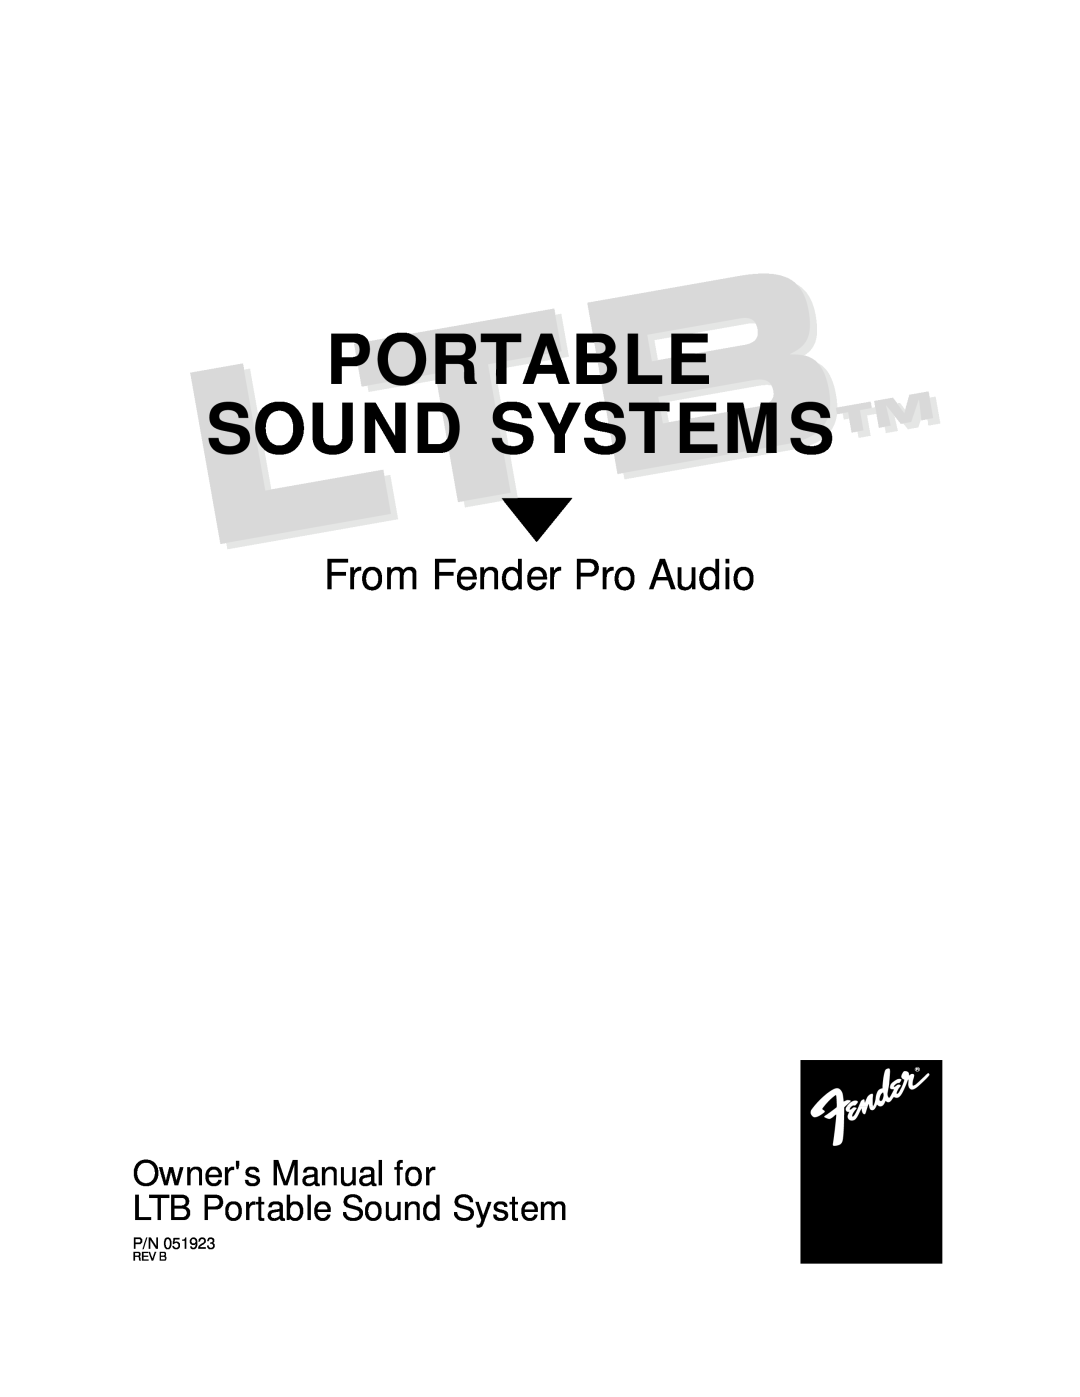 Fender P/N 051923 owner manual Portable Sound Systems, From Fender Pro Audio, Rev B 